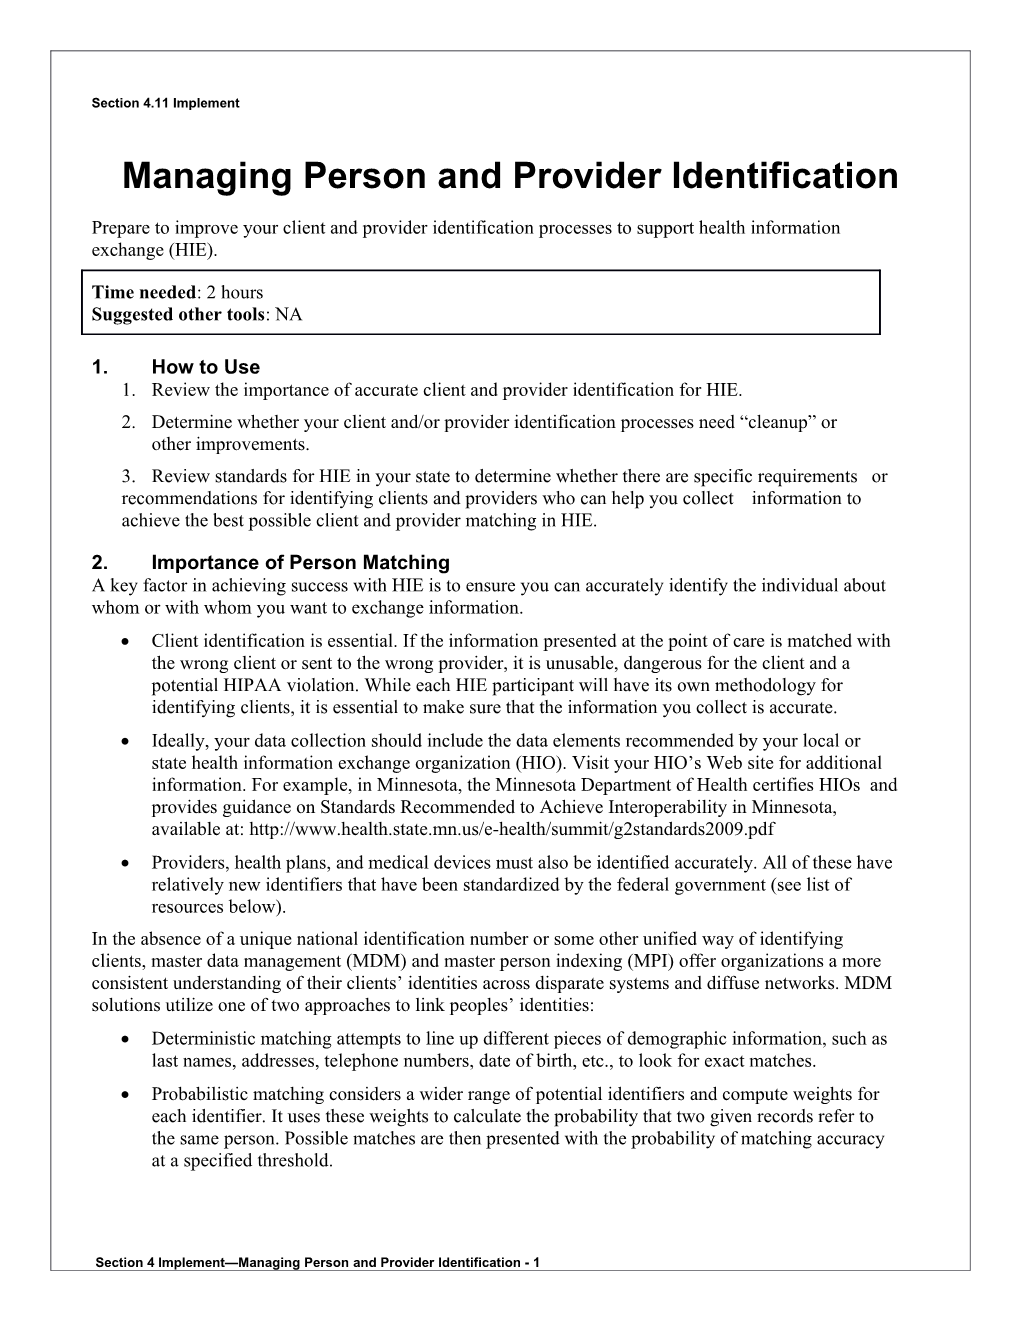 4 Managing Person and Provider Identiofication